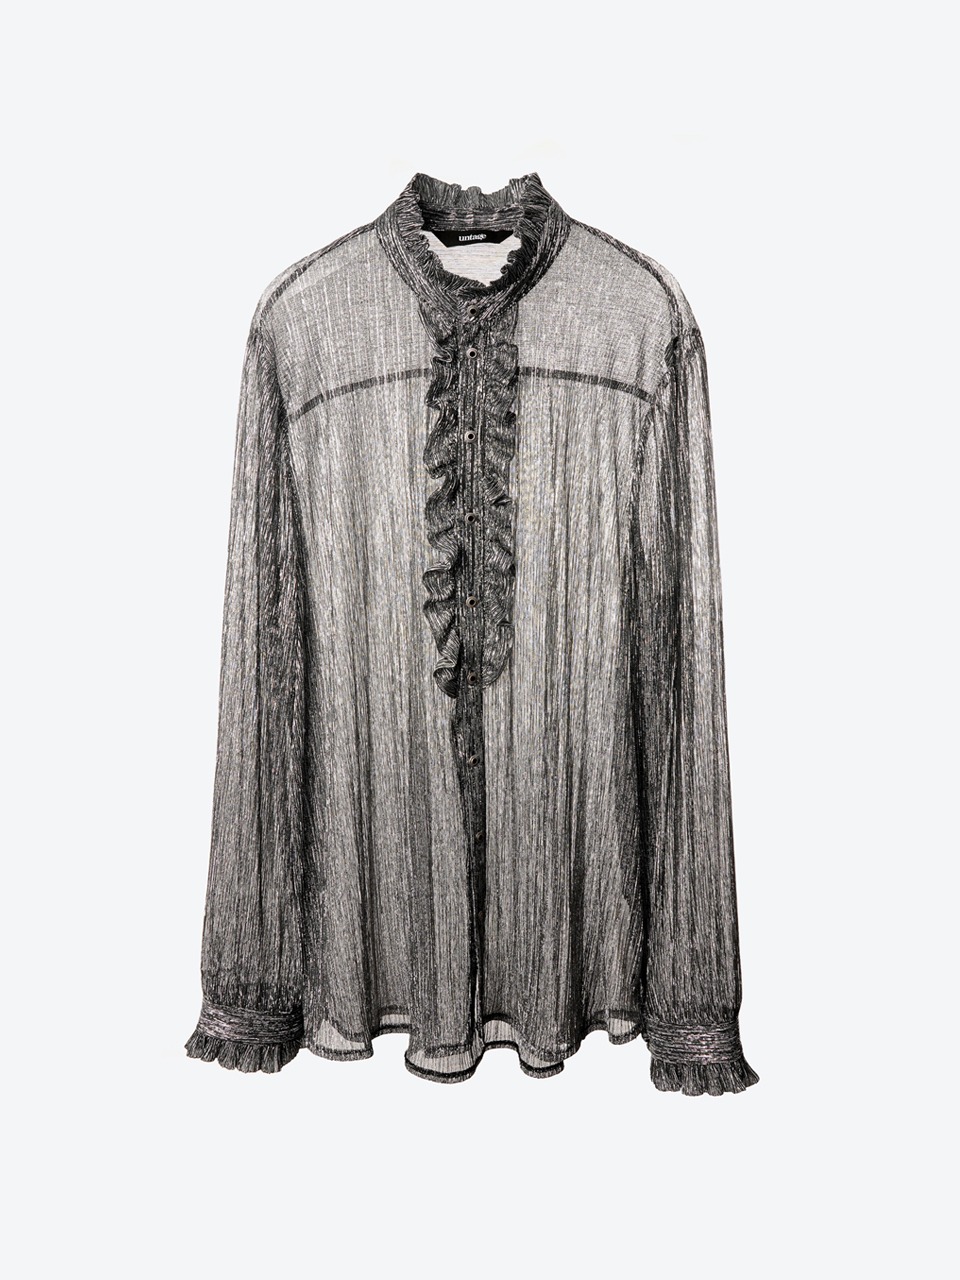 Victorian Ruffled Sheer Blouse for man (silver)